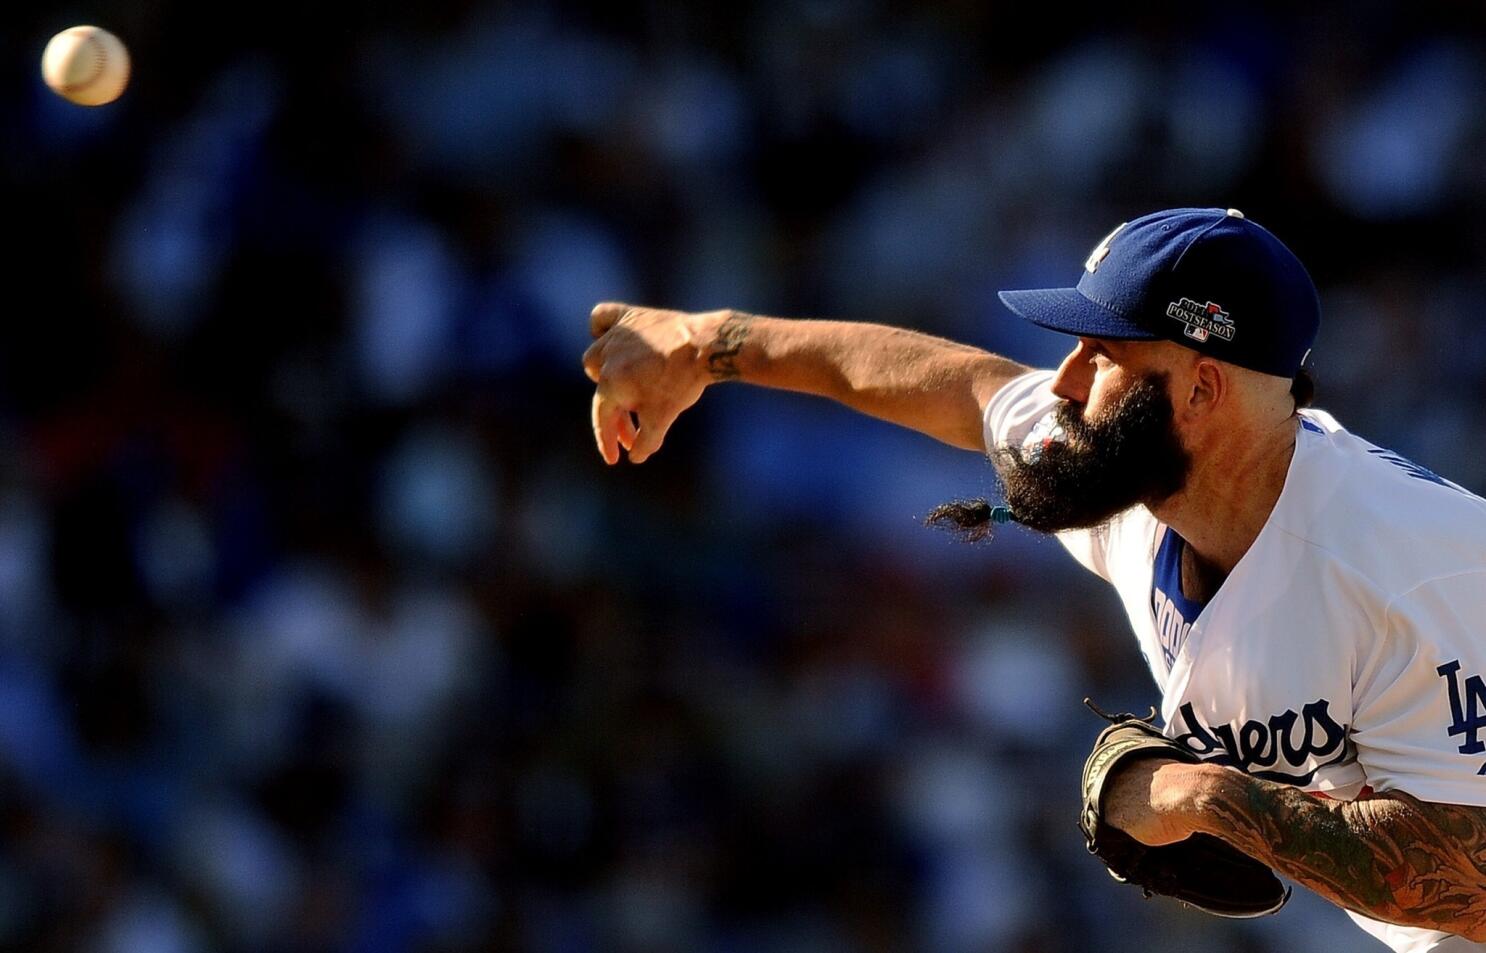 Applause, please: Brian Wilson won't shave beard to be a Yankee